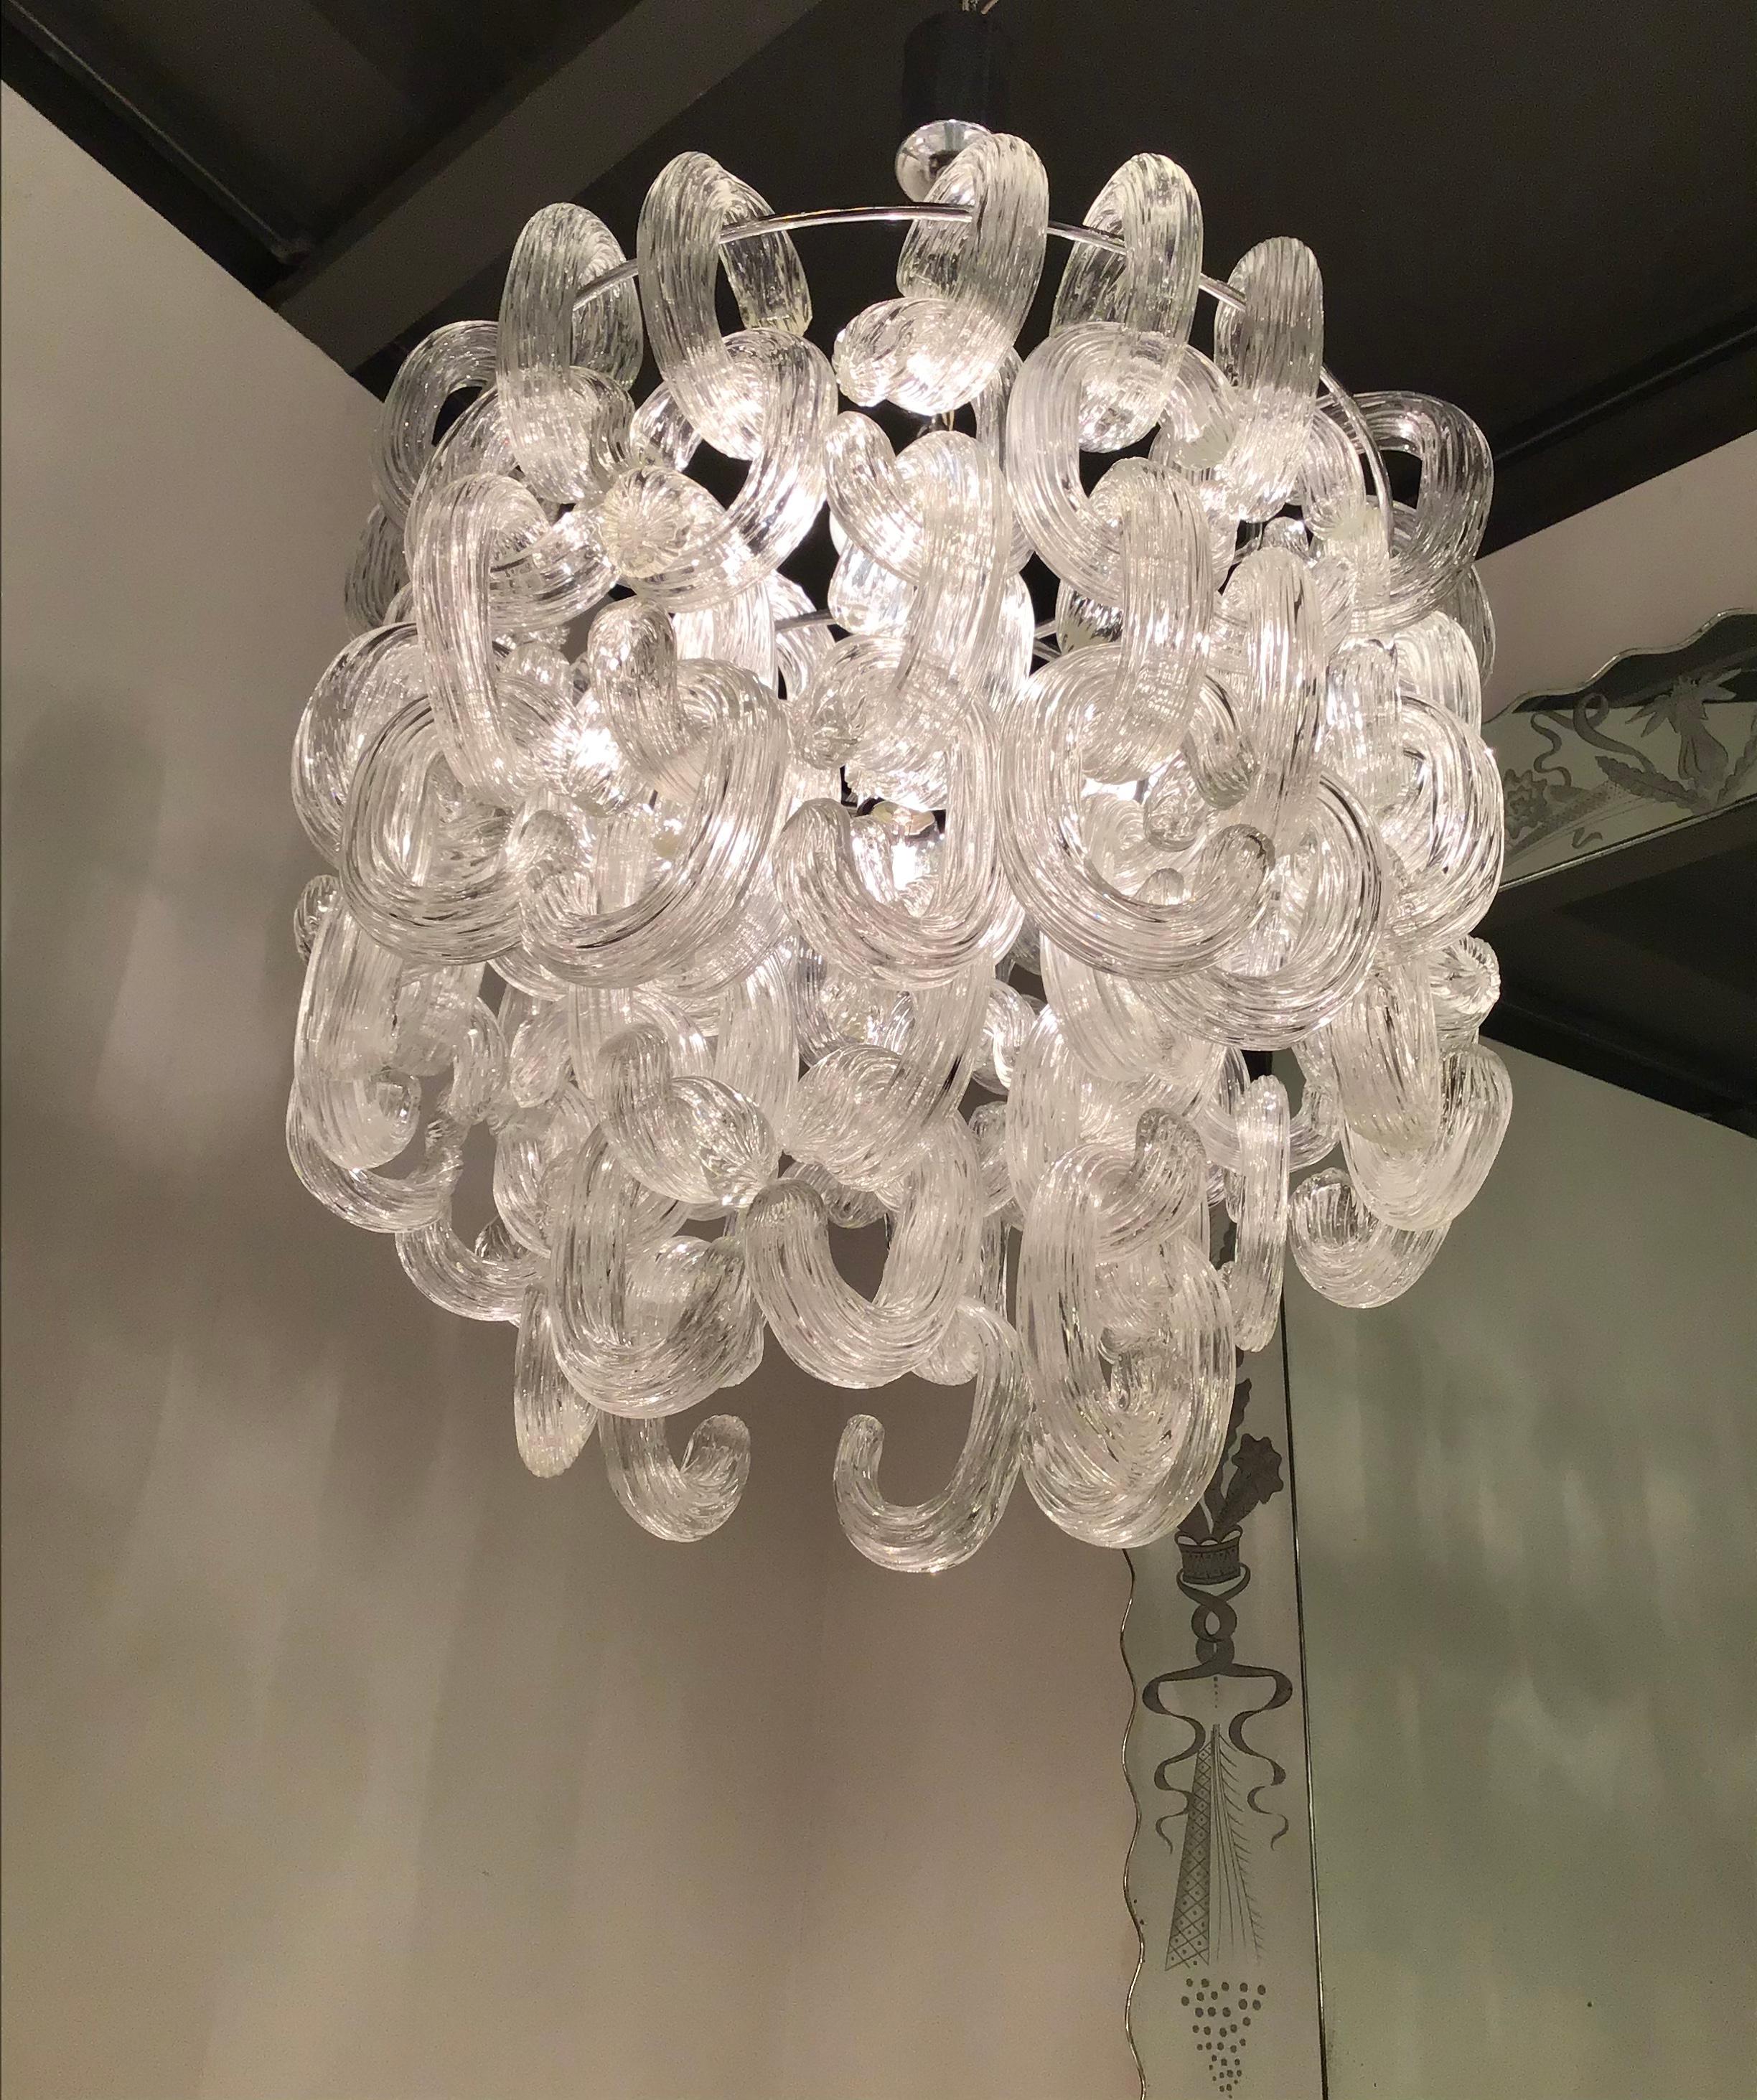 Giusto Toso “Fratelli Toso” gala chandelier Murano glass metal crome, 1960, Italy.